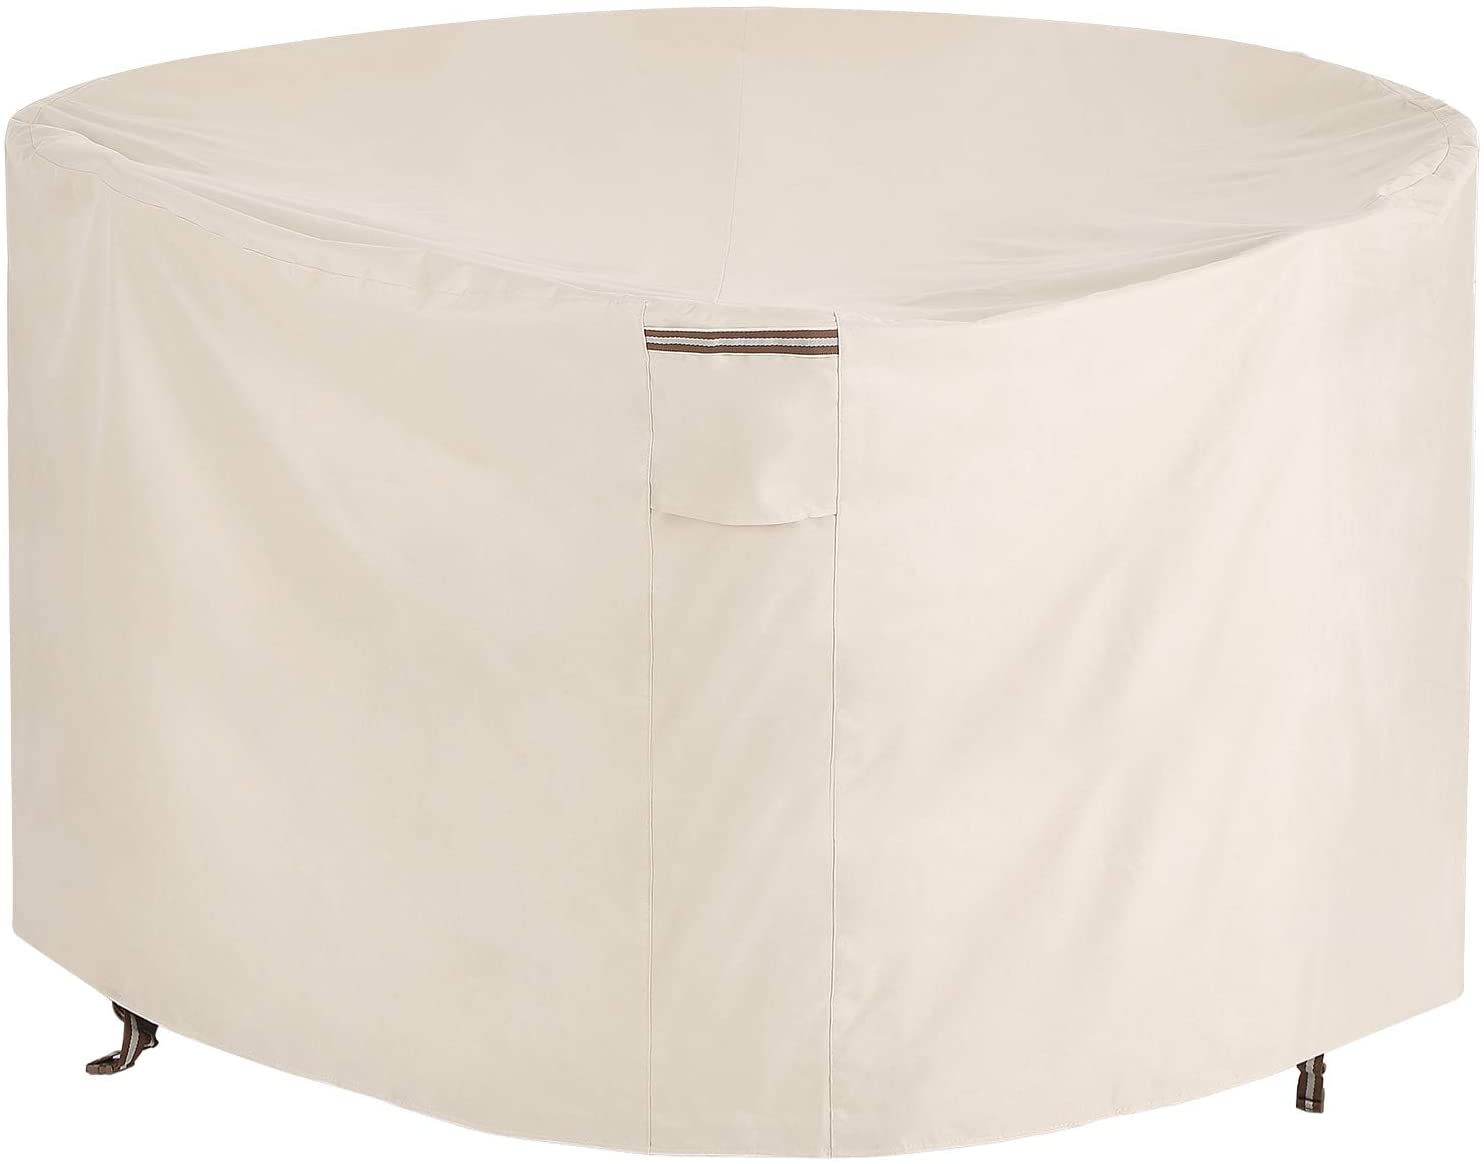 SONGMICS Round Fire Fit Cover &  Patio Sofa Cover from $15.19 + Free Shipping w/ Prime or Orders $25+